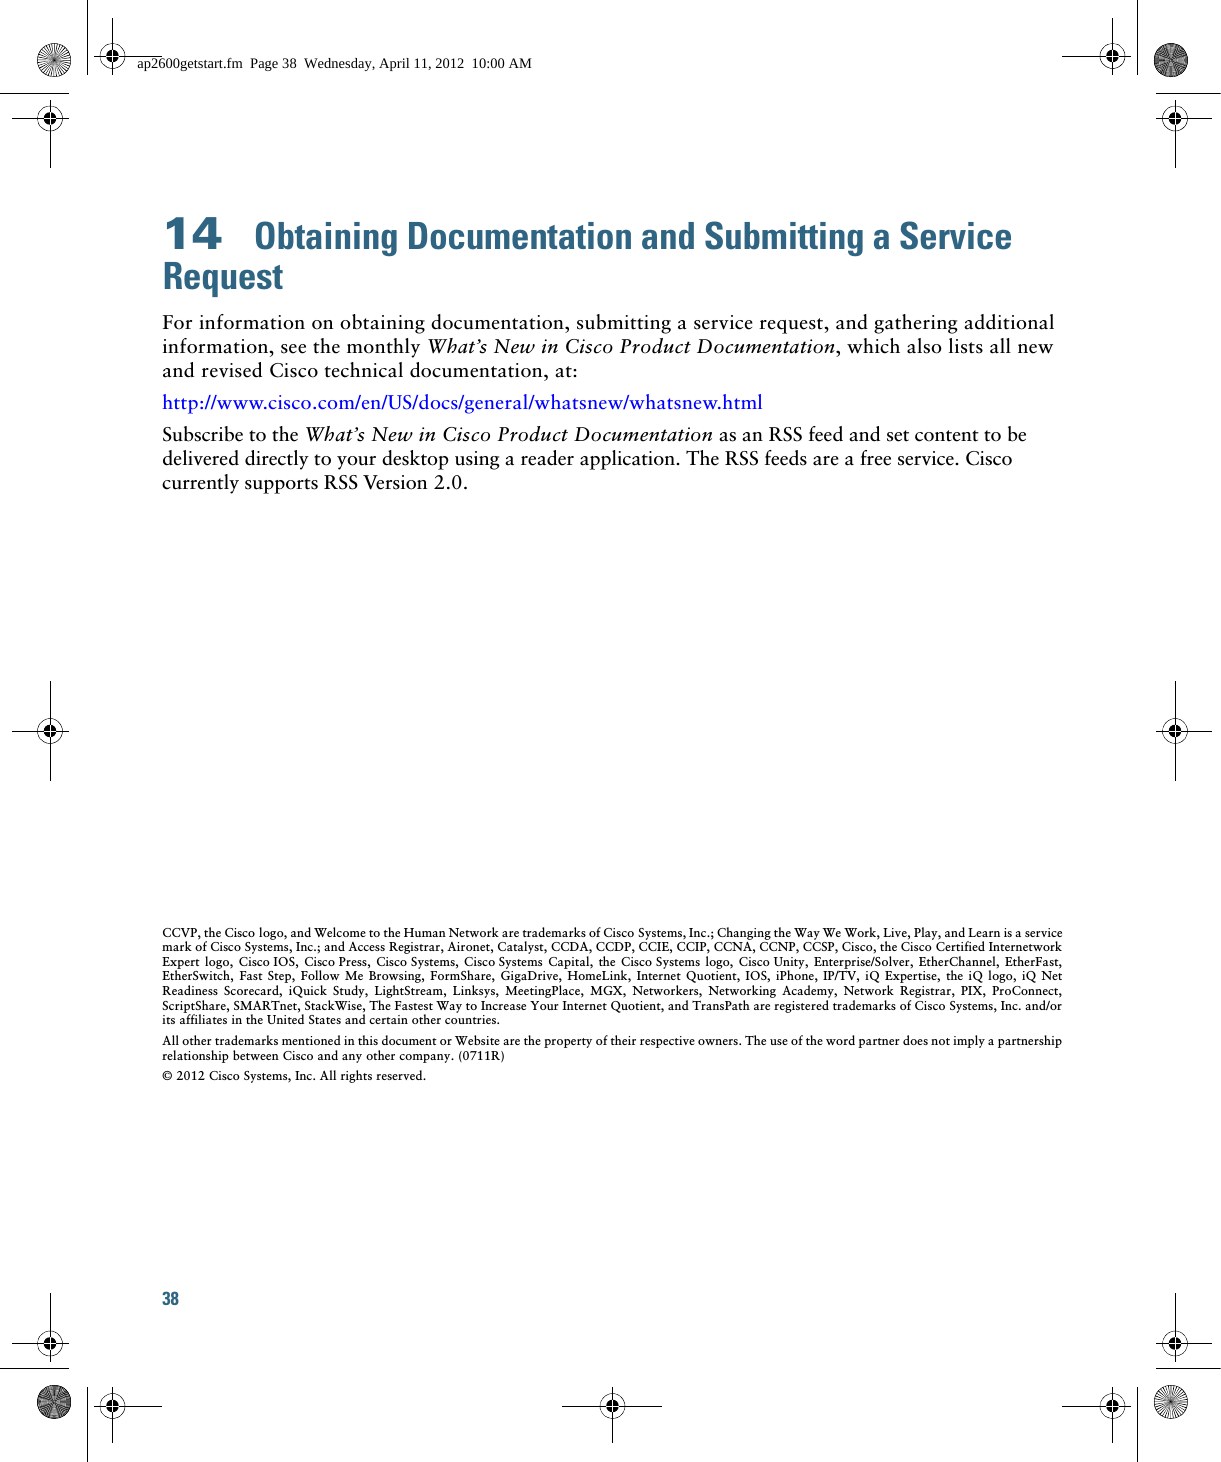 38 14  Obtaining Documentation and Submitting a Service RequestFor information on obtaining documentation, submitting a service request, and gathering additional information, see the monthly What’s New in Cisco Product Documentation, which also lists all new and revised Cisco technical documentation, at:http://www.cisco.com/en/US/docs/general/whatsnew/whatsnew.htmlSubscribe to the What’s New in Cisco Product Documentation as an RSS feed and set content to be delivered directly to your desktop using a reader application. The RSS feeds are a free service. Cisco currently supports RSS Version 2.0.CCVP, the Cisco logo, and Welcome to the Human Network are trademarks of Cisco Systems, Inc.; Changing the Way We Work, Live, Play, and Learn is a service mark of Cisco Systems, Inc.; and Access Registrar, Aironet, Catalyst, CCDA, CCDP, CCIE, CCIP, CCNA, CCNP, CCSP, Cisco, the Cisco Certified Internetwork Expert logo, Cisco IOS, Cisco Press, Cisco Systems, Cisco Systems Capital, the Cisco Systems logo, Cisco Unity, Enterprise/Solver, EtherChannel, EtherFast, EtherSwitch, Fast Step, Follow Me Browsing, FormShare, GigaDrive, HomeLink, Internet Quotient, IOS, iPhone, IP/TV, iQ Expertise, the iQ logo, iQ Net Readiness Scorecard, iQuick Study, LightStream, Linksys, MeetingPlace, MGX, Networkers, Networking Academy, Network Registrar, PIX, ProConnect, ScriptShare, SMARTnet, StackWise, The Fastest Way to Increase Your Internet Quotient, and TransPath are registered trademarks of Cisco Systems, Inc. and/or its affiliates in the United States and certain other countries. All other trademarks mentioned in this document or Website are the property of their respective owners. The use of the word partner does not imply a partnership relationship between Cisco and any other company. (0711R)© 2012 Cisco Systems, Inc. All rights reserved.ap2600getstart.fm  Page 38  Wednesday, April 11, 2012  10:00 AM